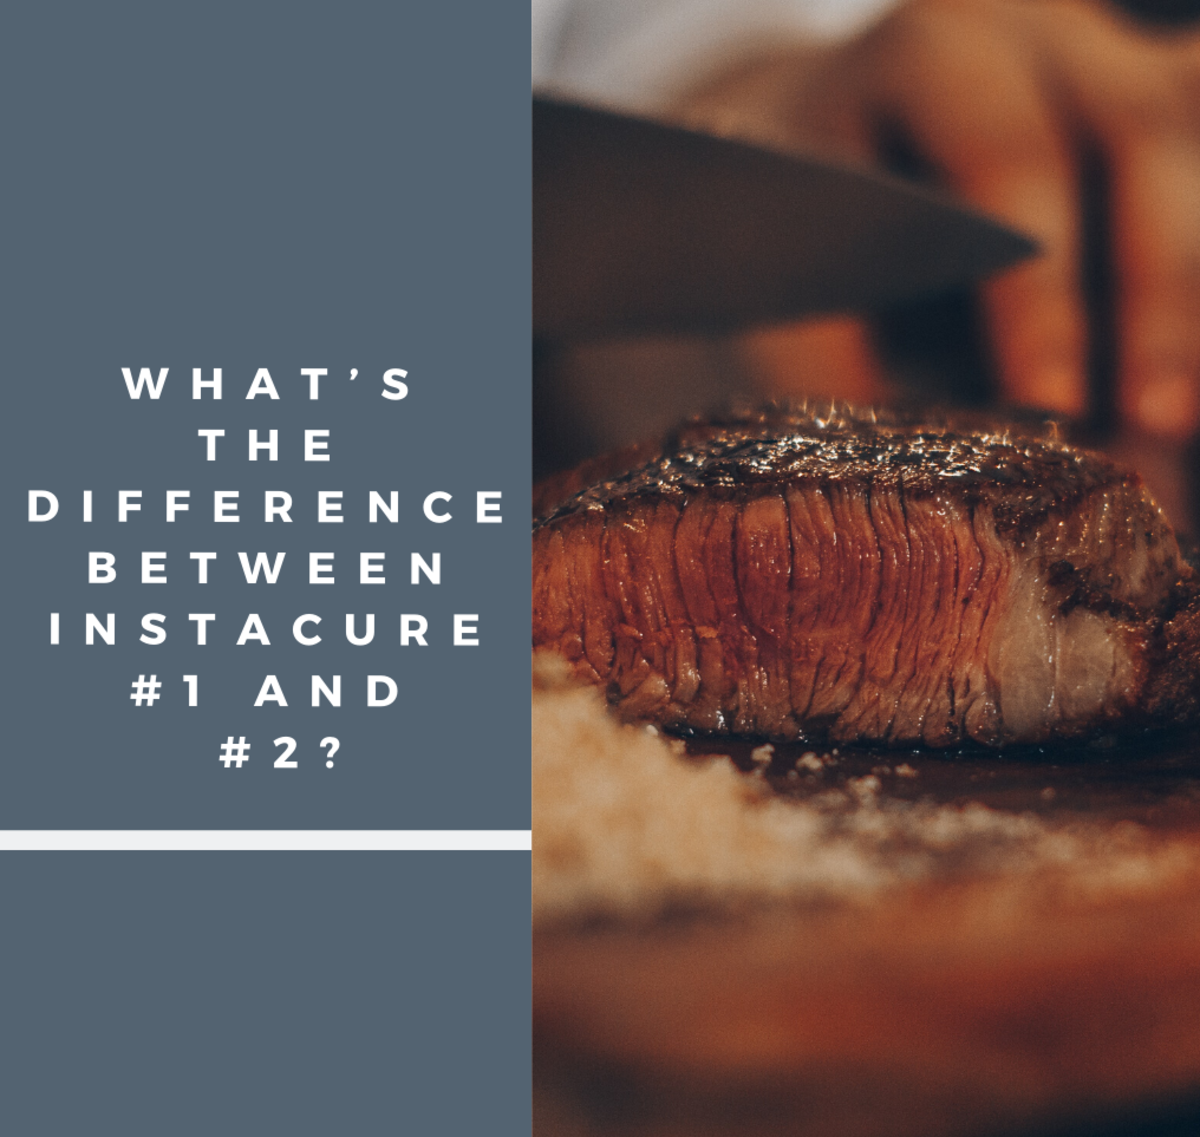 Understand the differences between Instacure #1 and #2 to cook the perfect steak. 